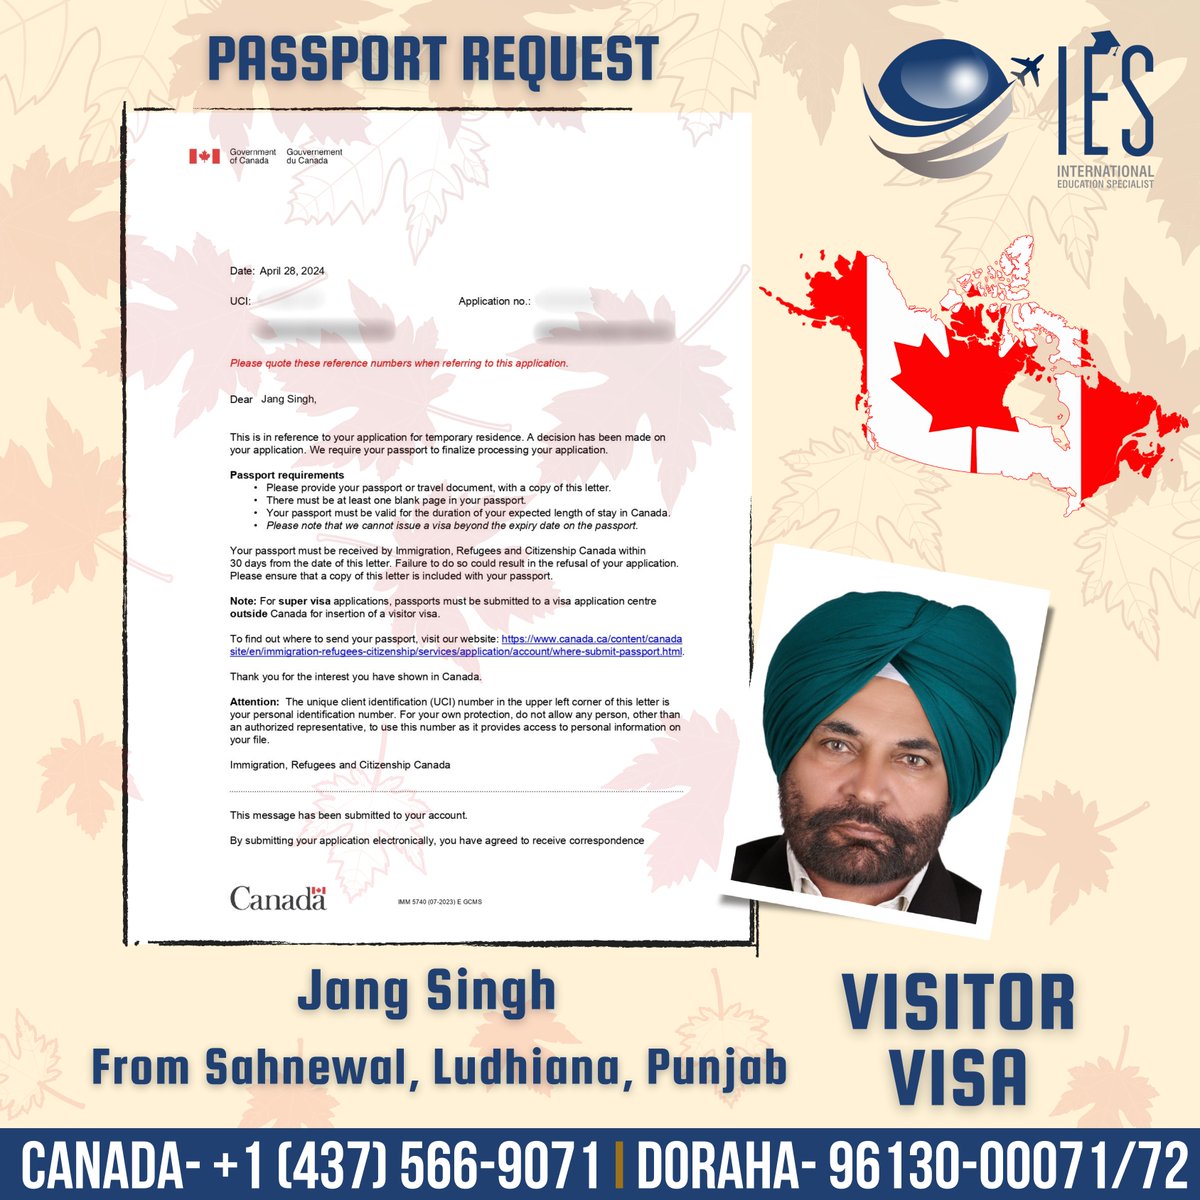 For those seeking a visitor visa, reach out to us for guidance throughout the application process.

#iesoverseas #canada #doraha #punjab #ludhiana #visaconsultants #visa #bestimmigrationservices #APPROVED #best #visitorvisa #TouristVisa #studyvisa